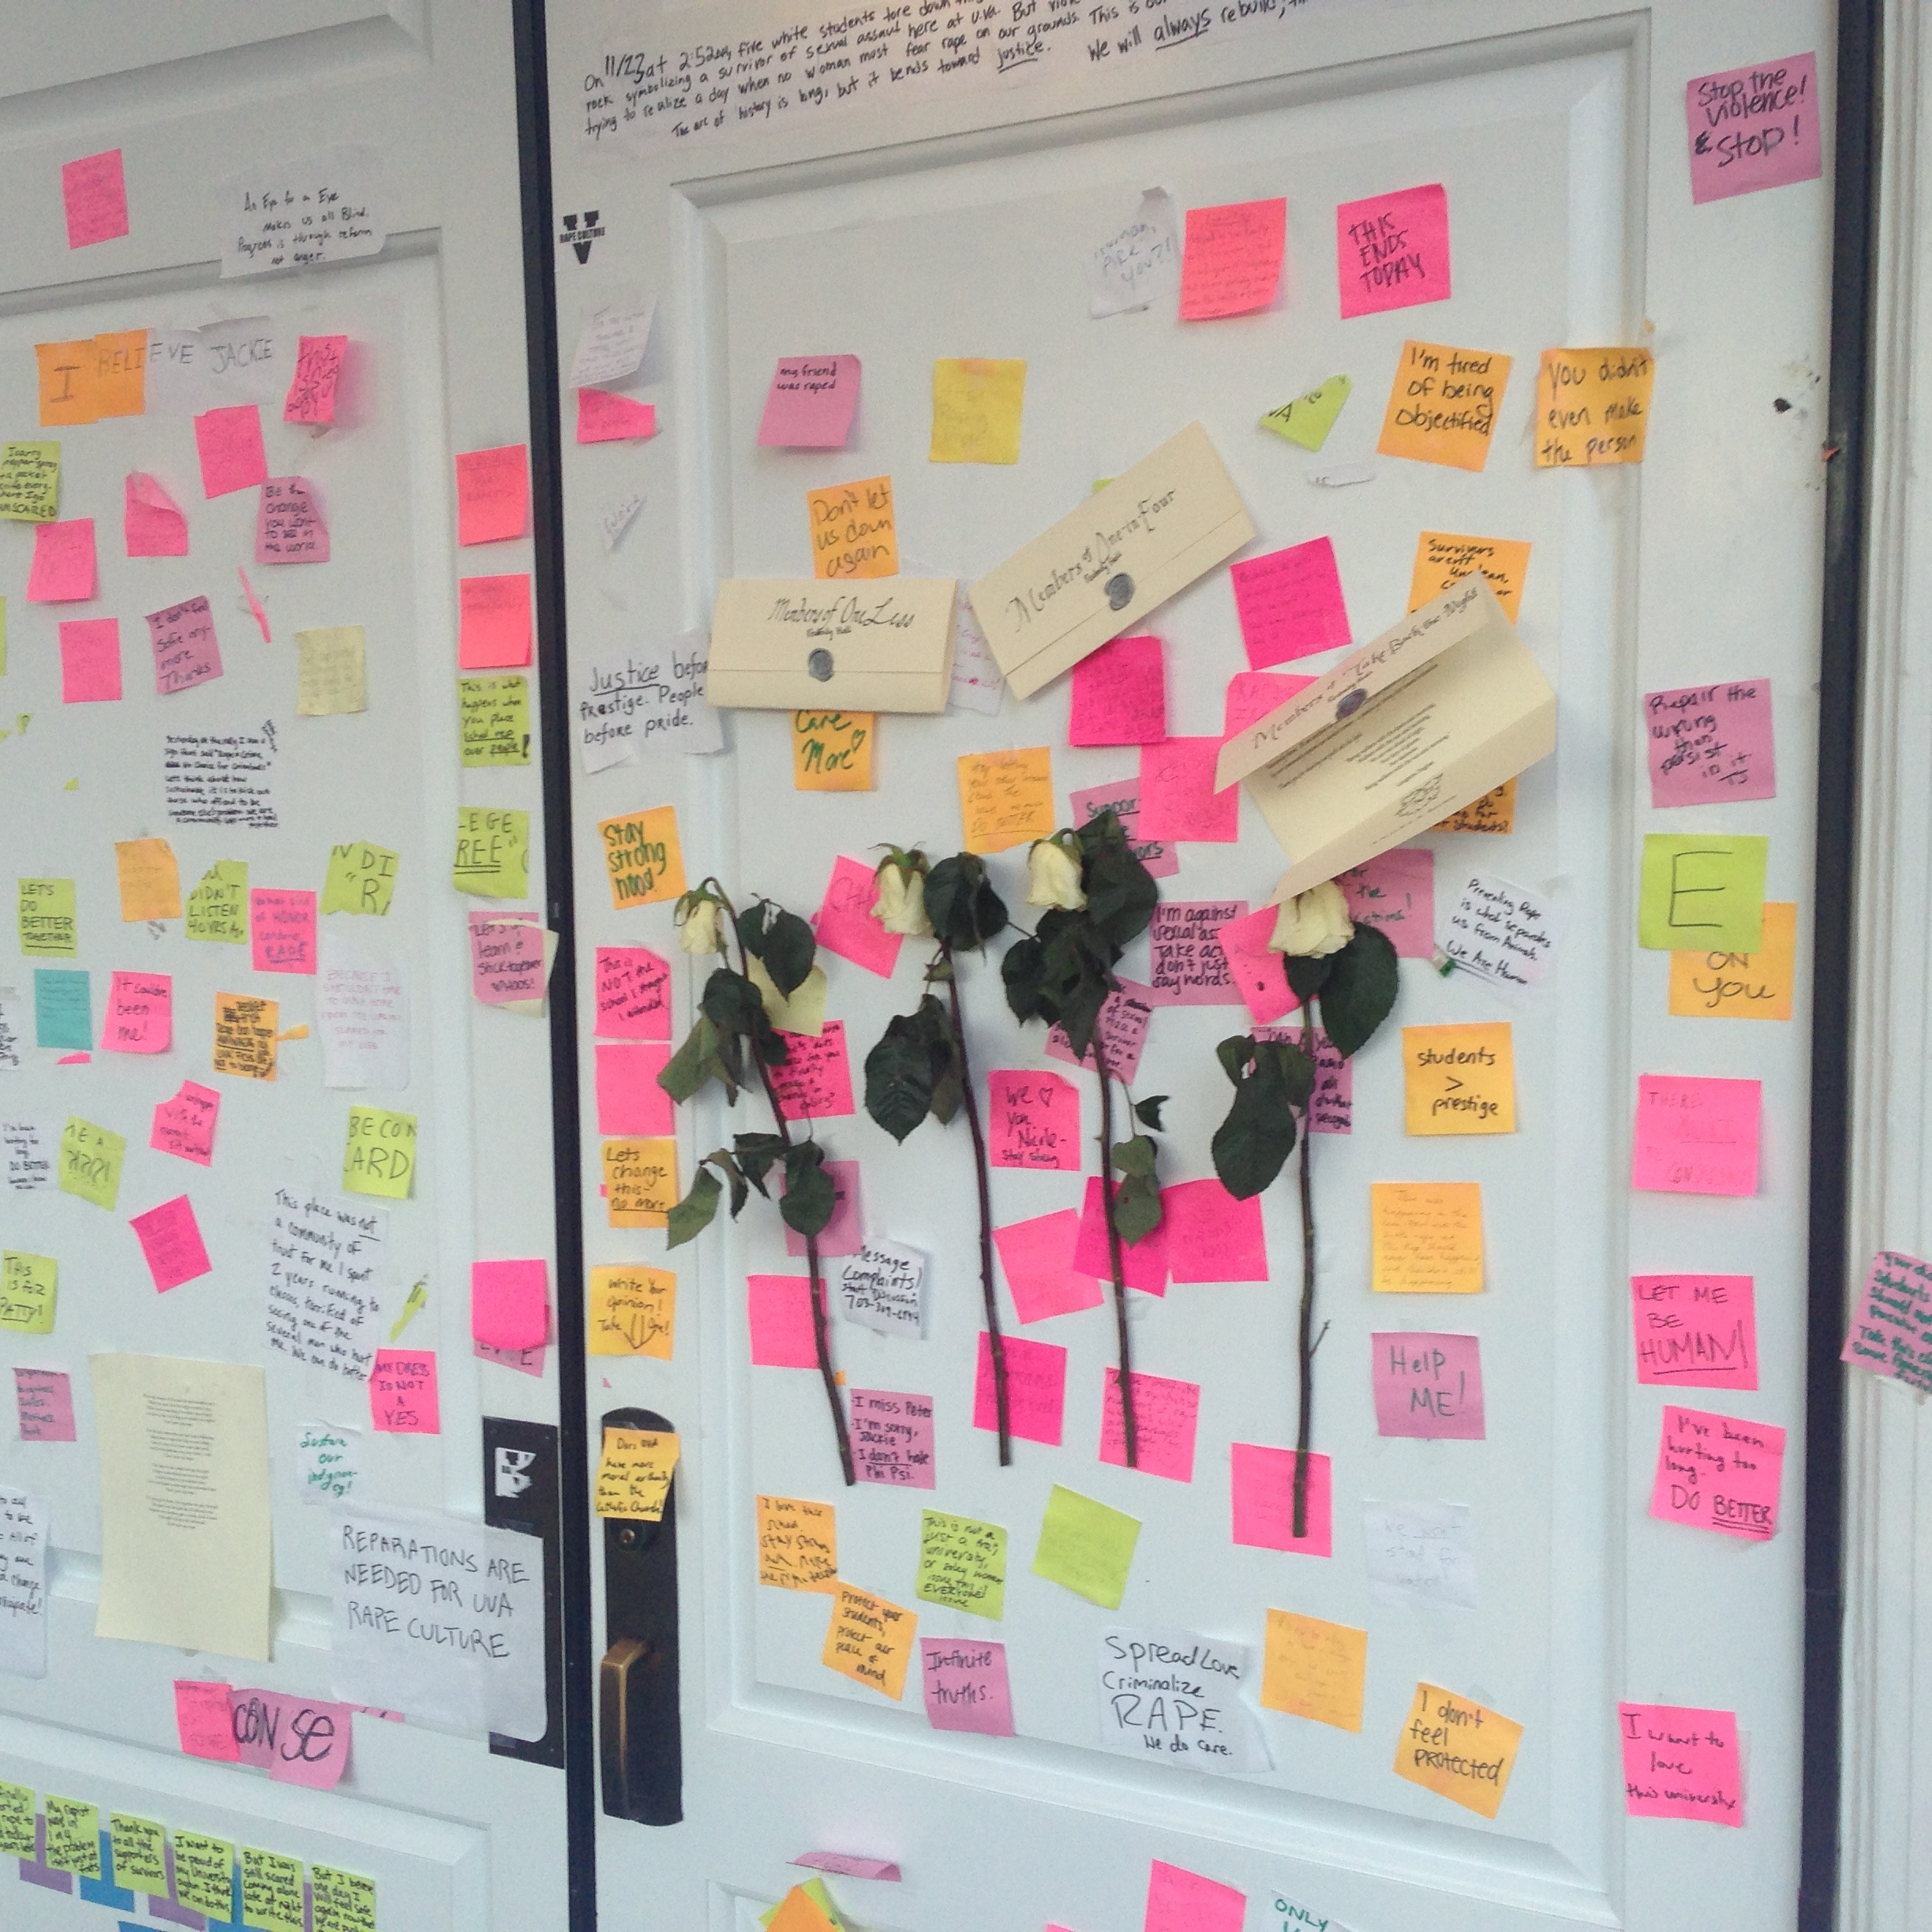 Display of Notes on the doors of Peabody Hall, 10 December 2014. (Photograph taken by Edward Gaynor.).